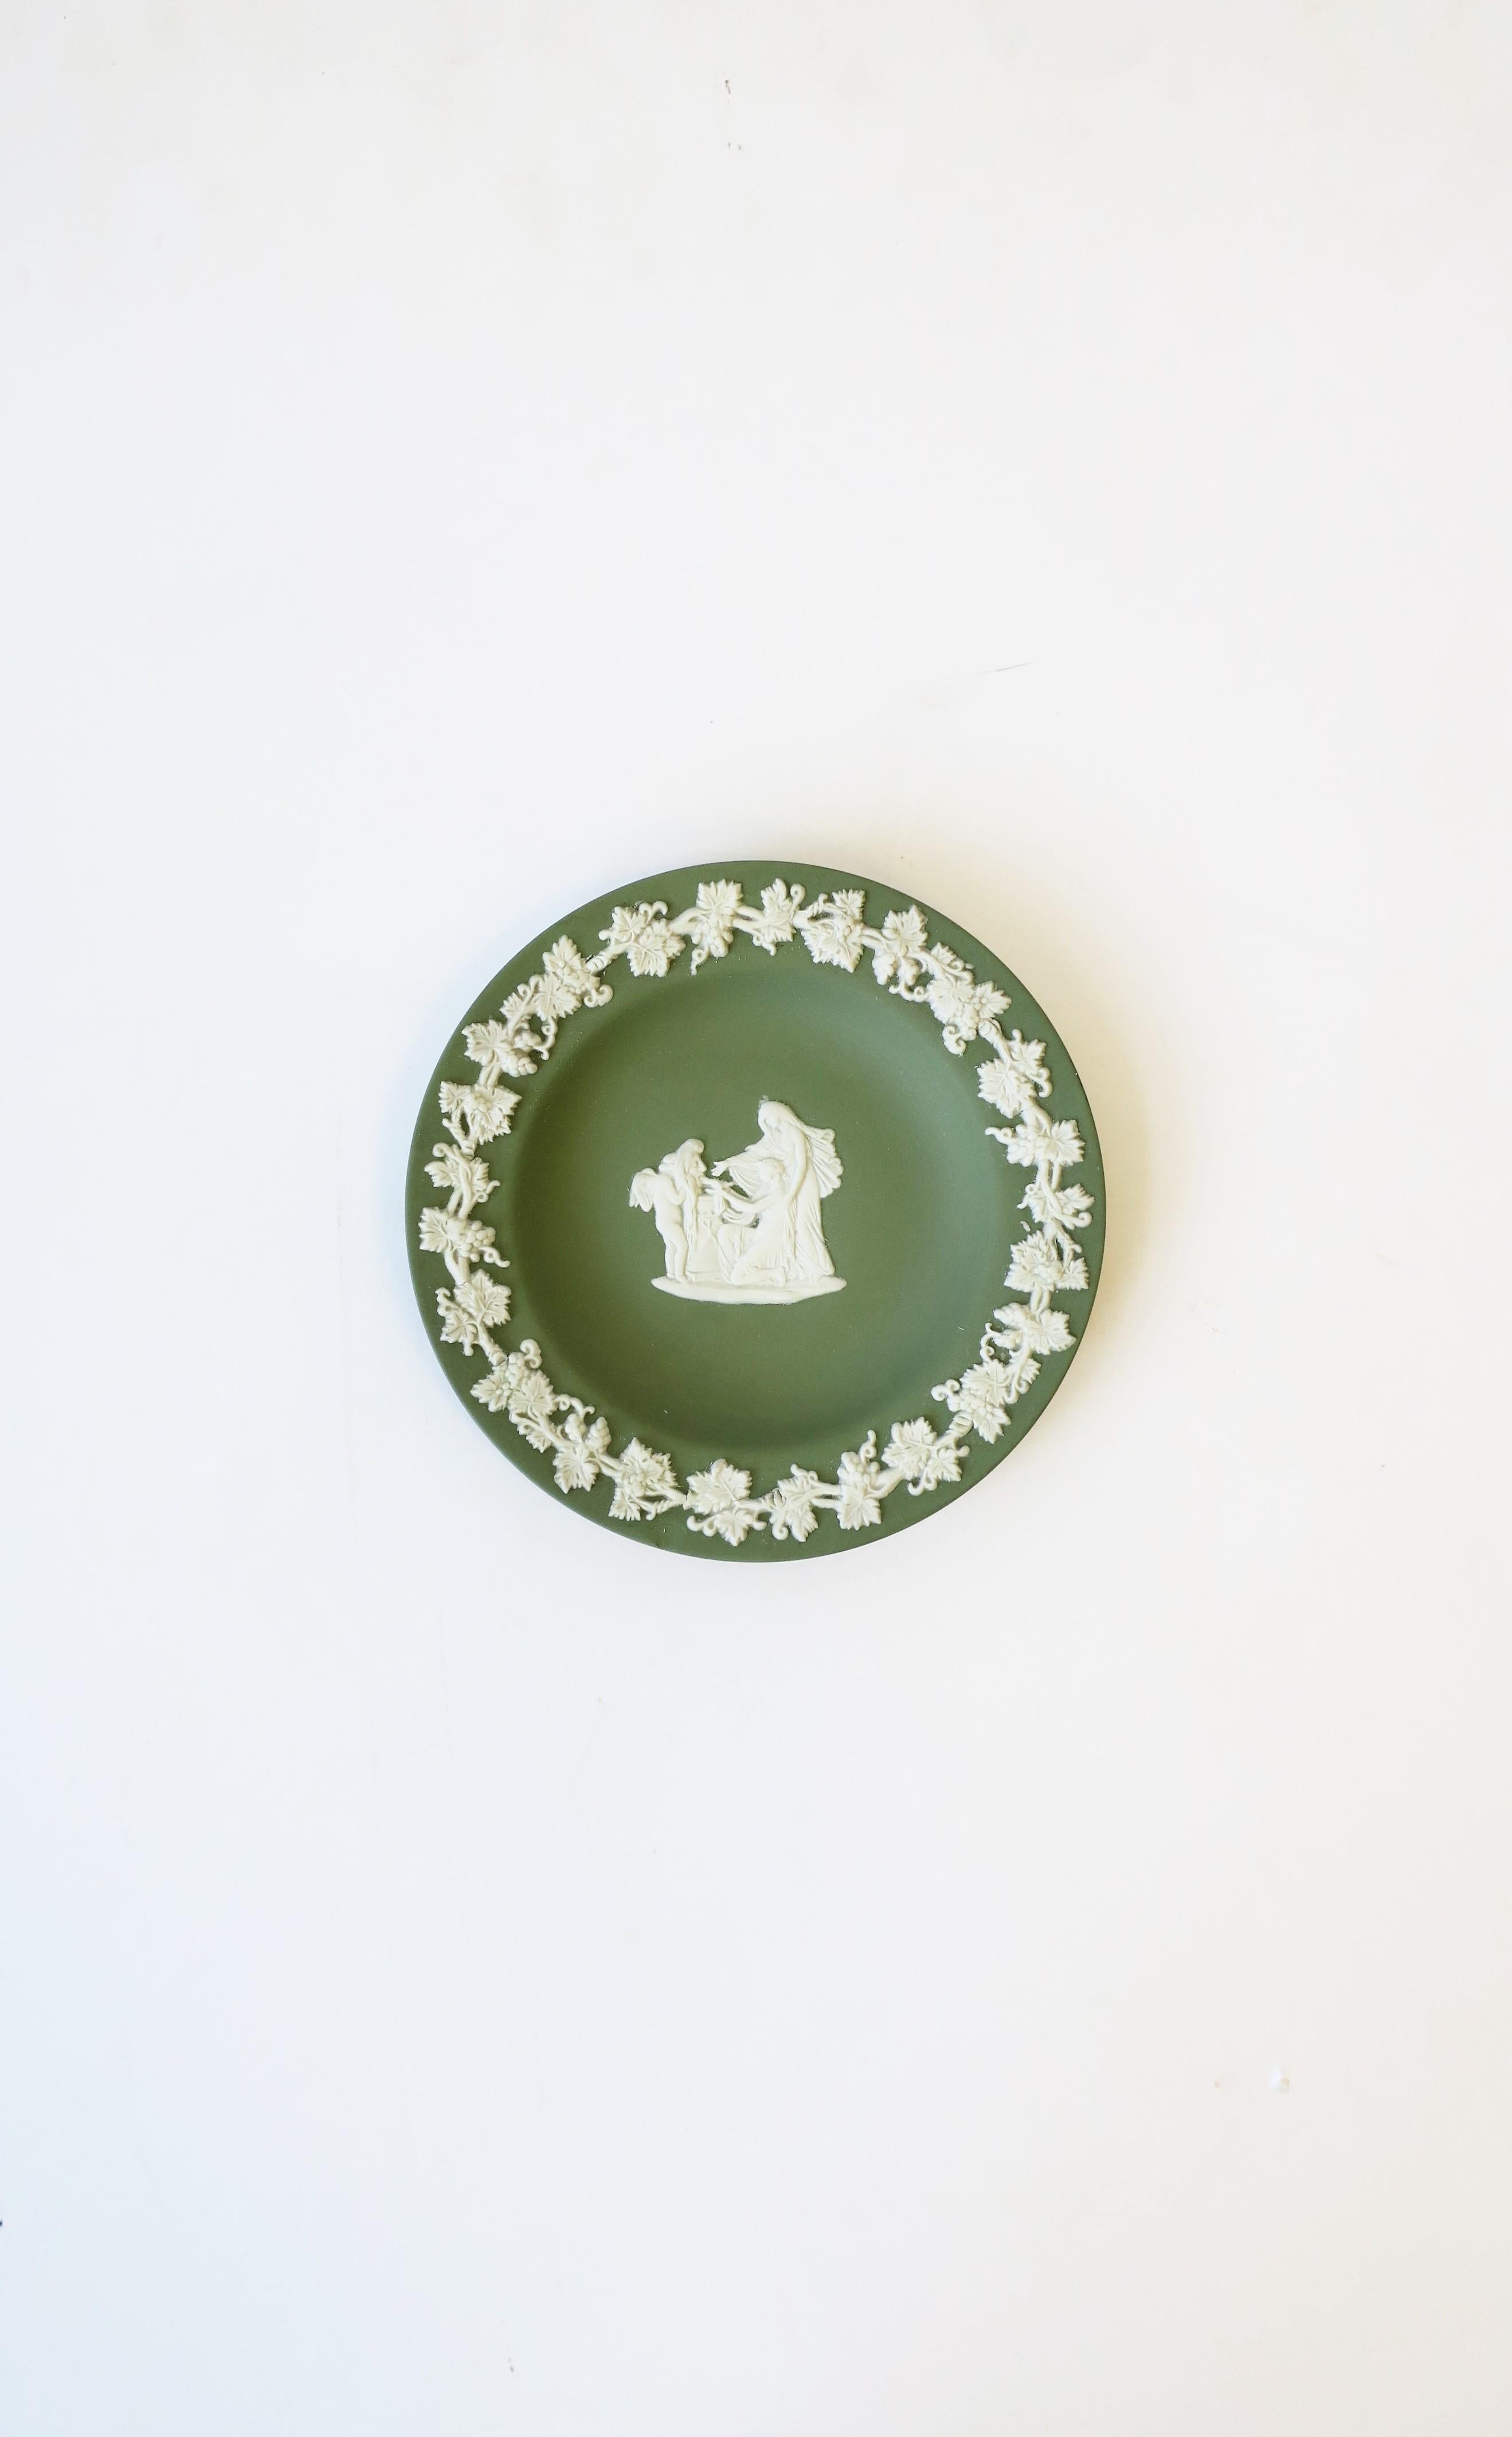 A beautiful English Wedgwood Jasperware sage green and white round jewelry dish with neoclassical design, circa 20th century, 1979, England. Piece is a matte stoneware in a light green with a white neoclassical raised relief at center and leaf